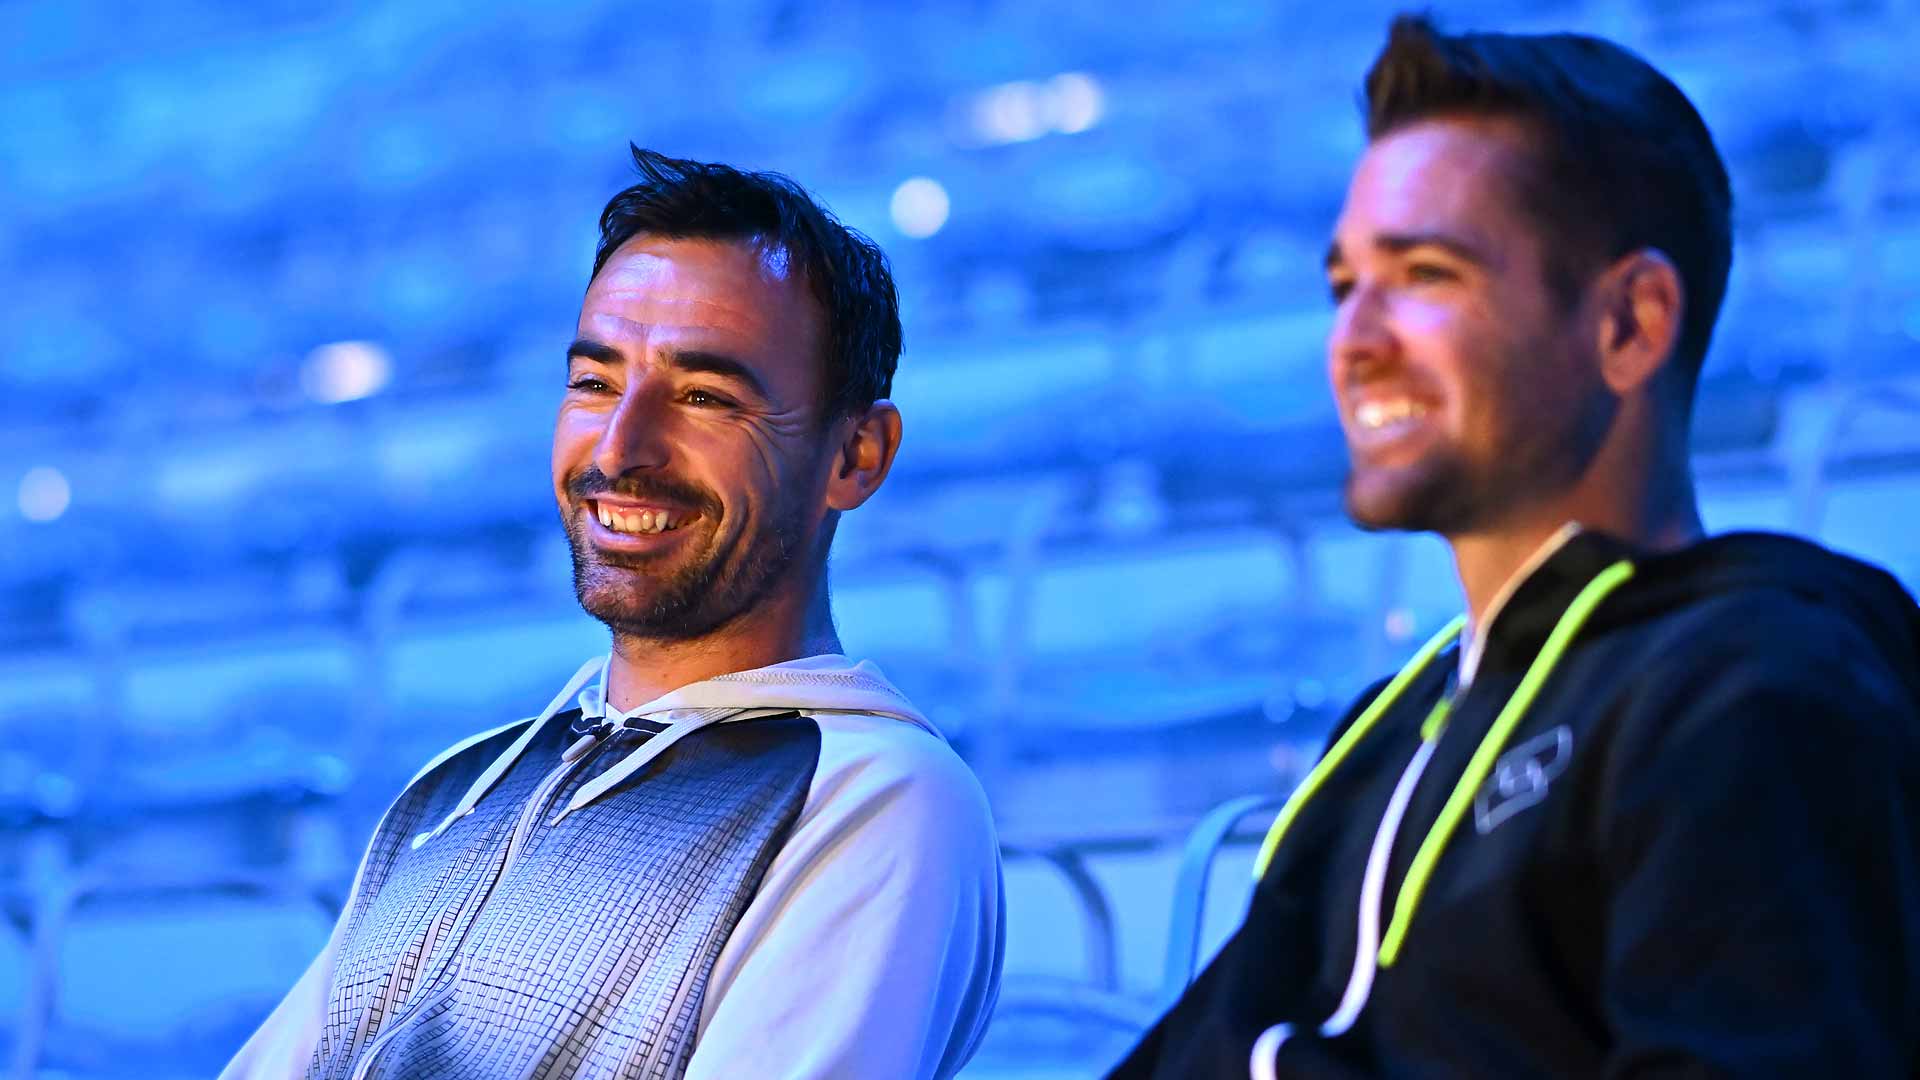 Ivan Dodig and Austin Krajicek are the top seeds at the 2023 Nitto ATP Finals.